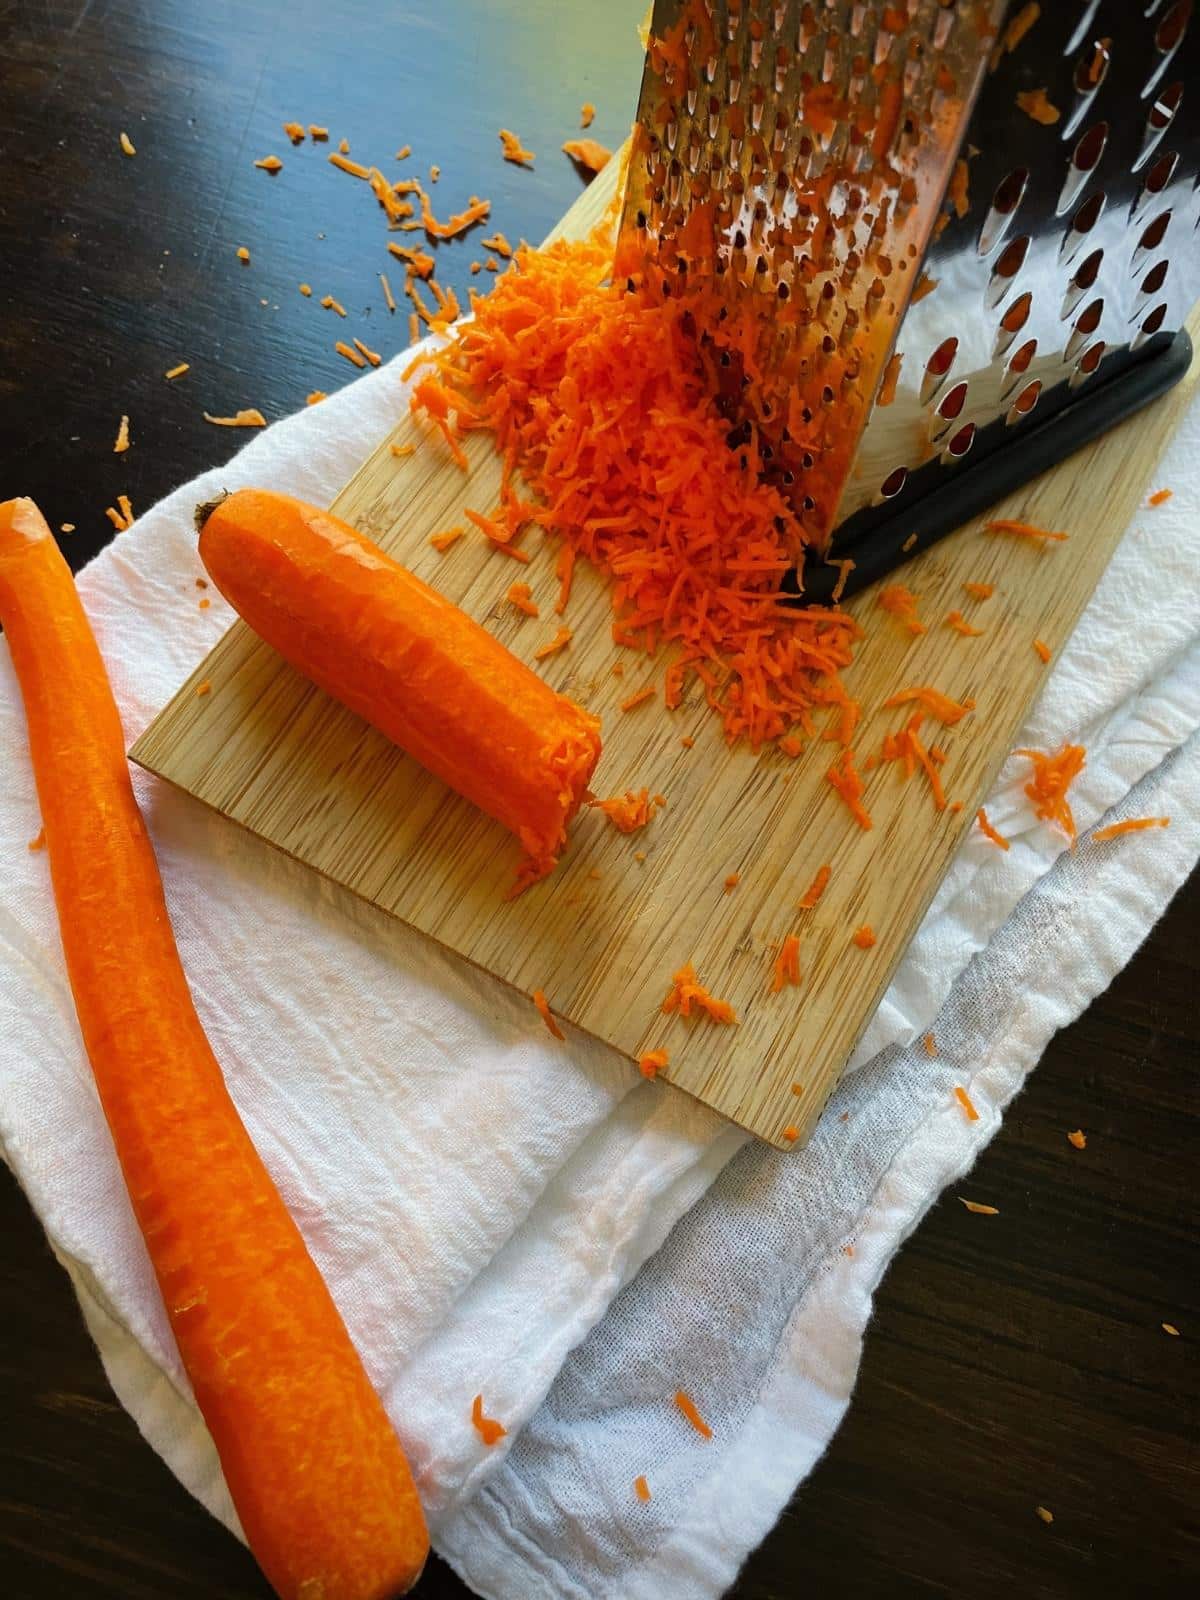 Grated carrots next to a box grater.